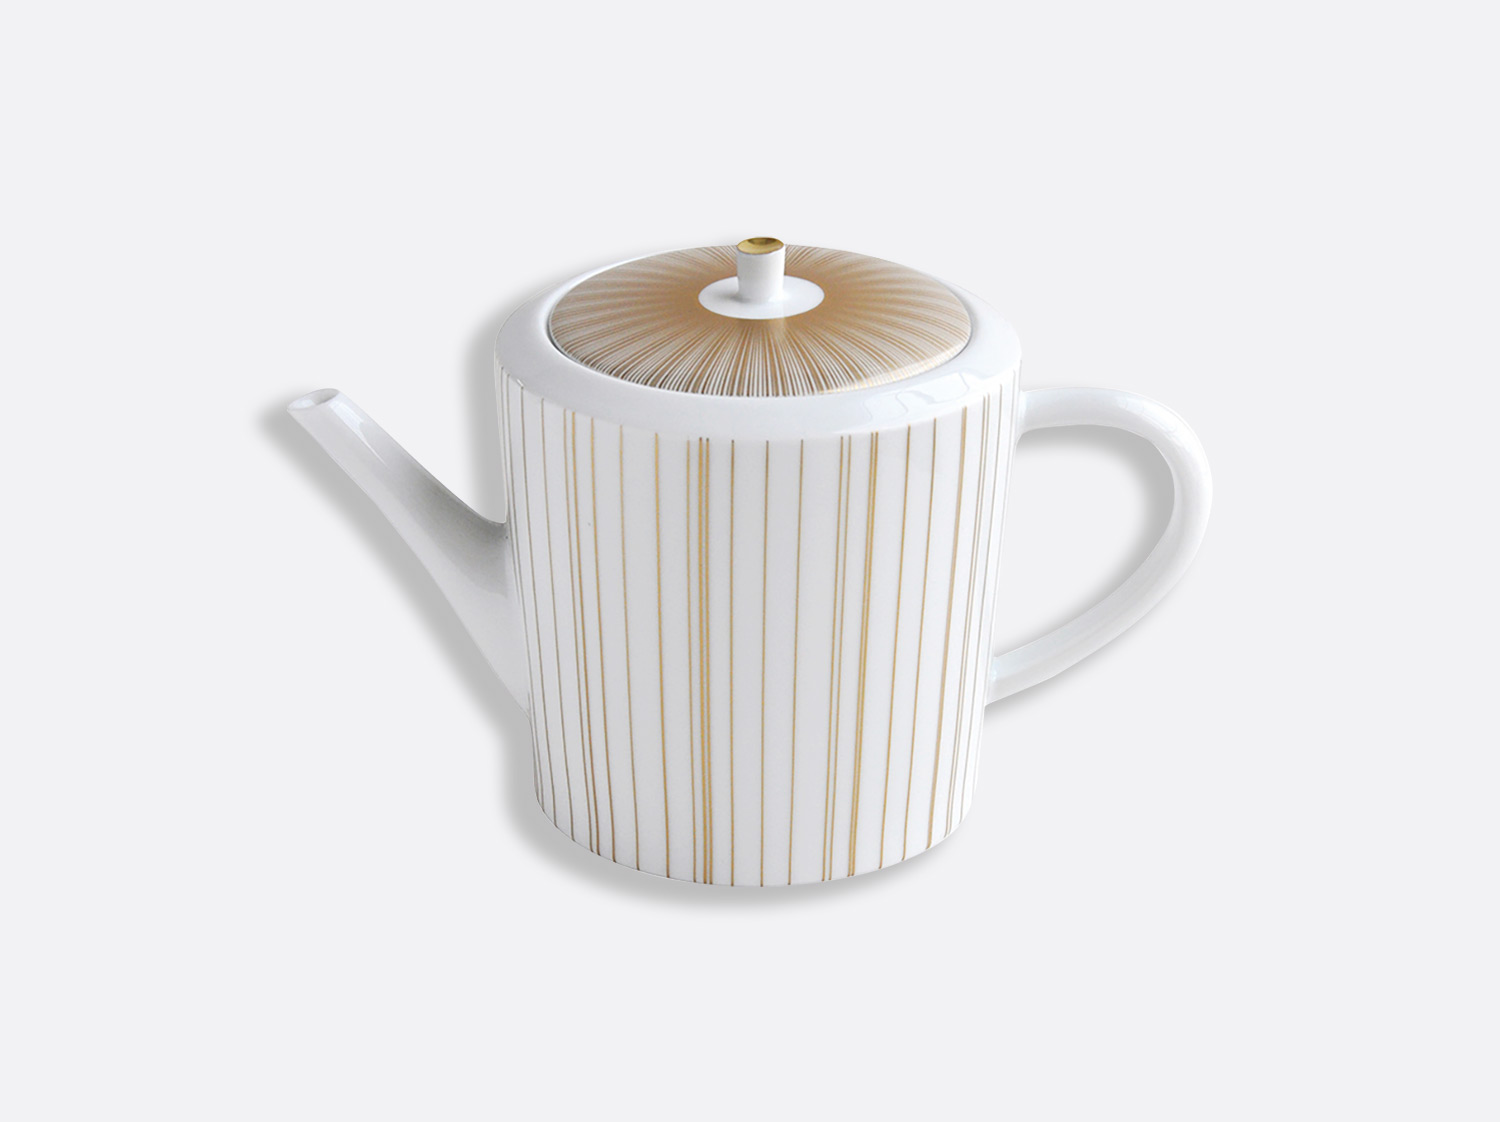 China Hot beverage server H. 5.9" of the collection Sol | Bernardaud